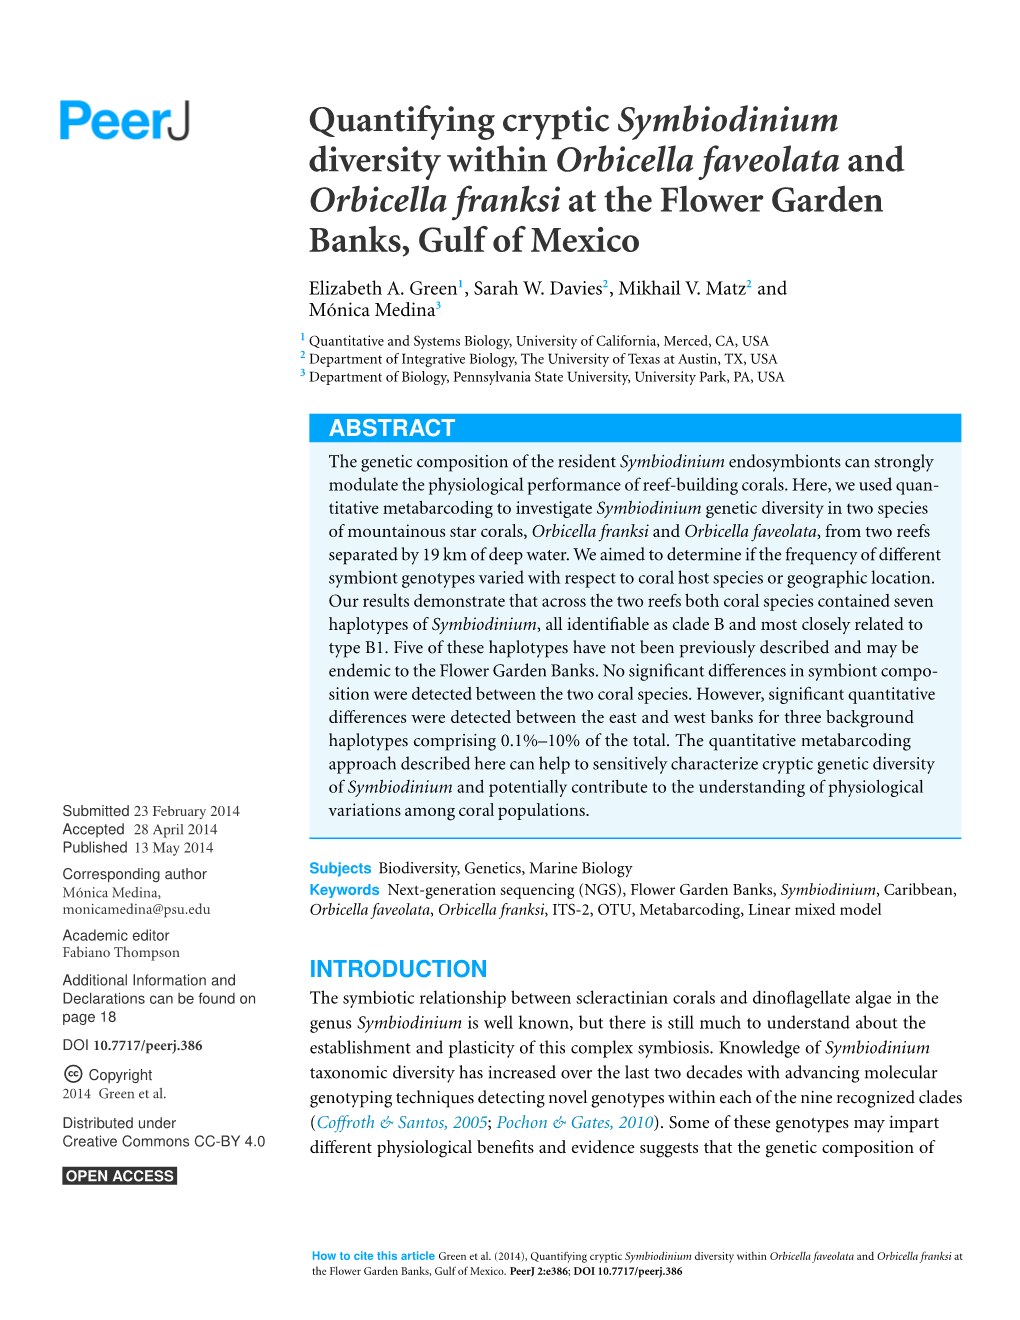 Quantifying Cryptic Symbiodinium Diversity Within Orbicella Faveolata and Orbicella Franksi at the Flower Garden Banks, Gulf of Mexico Elizabeth A